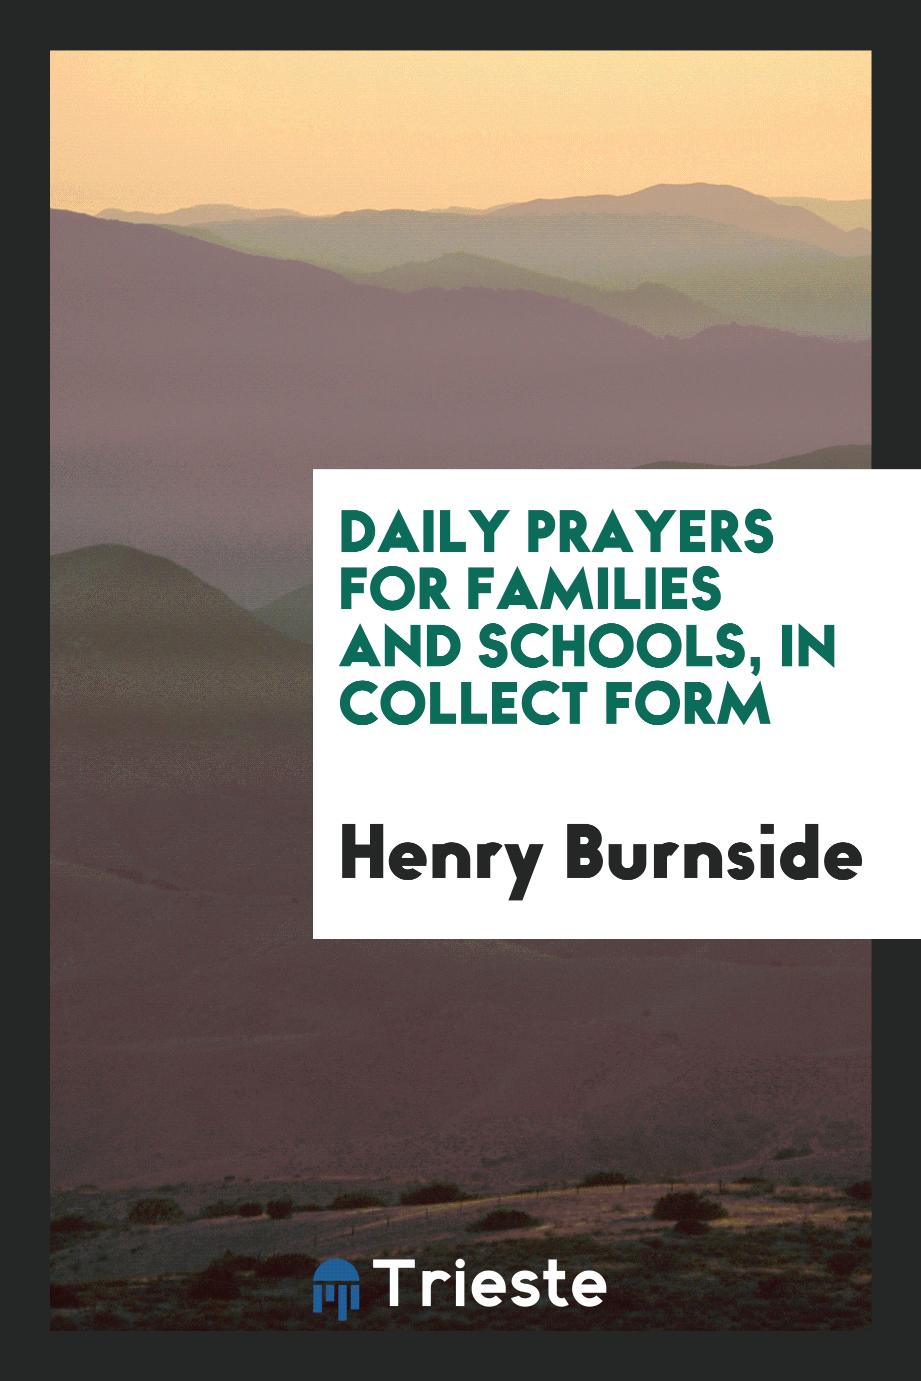 Daily prayers for families and schools, in collect form